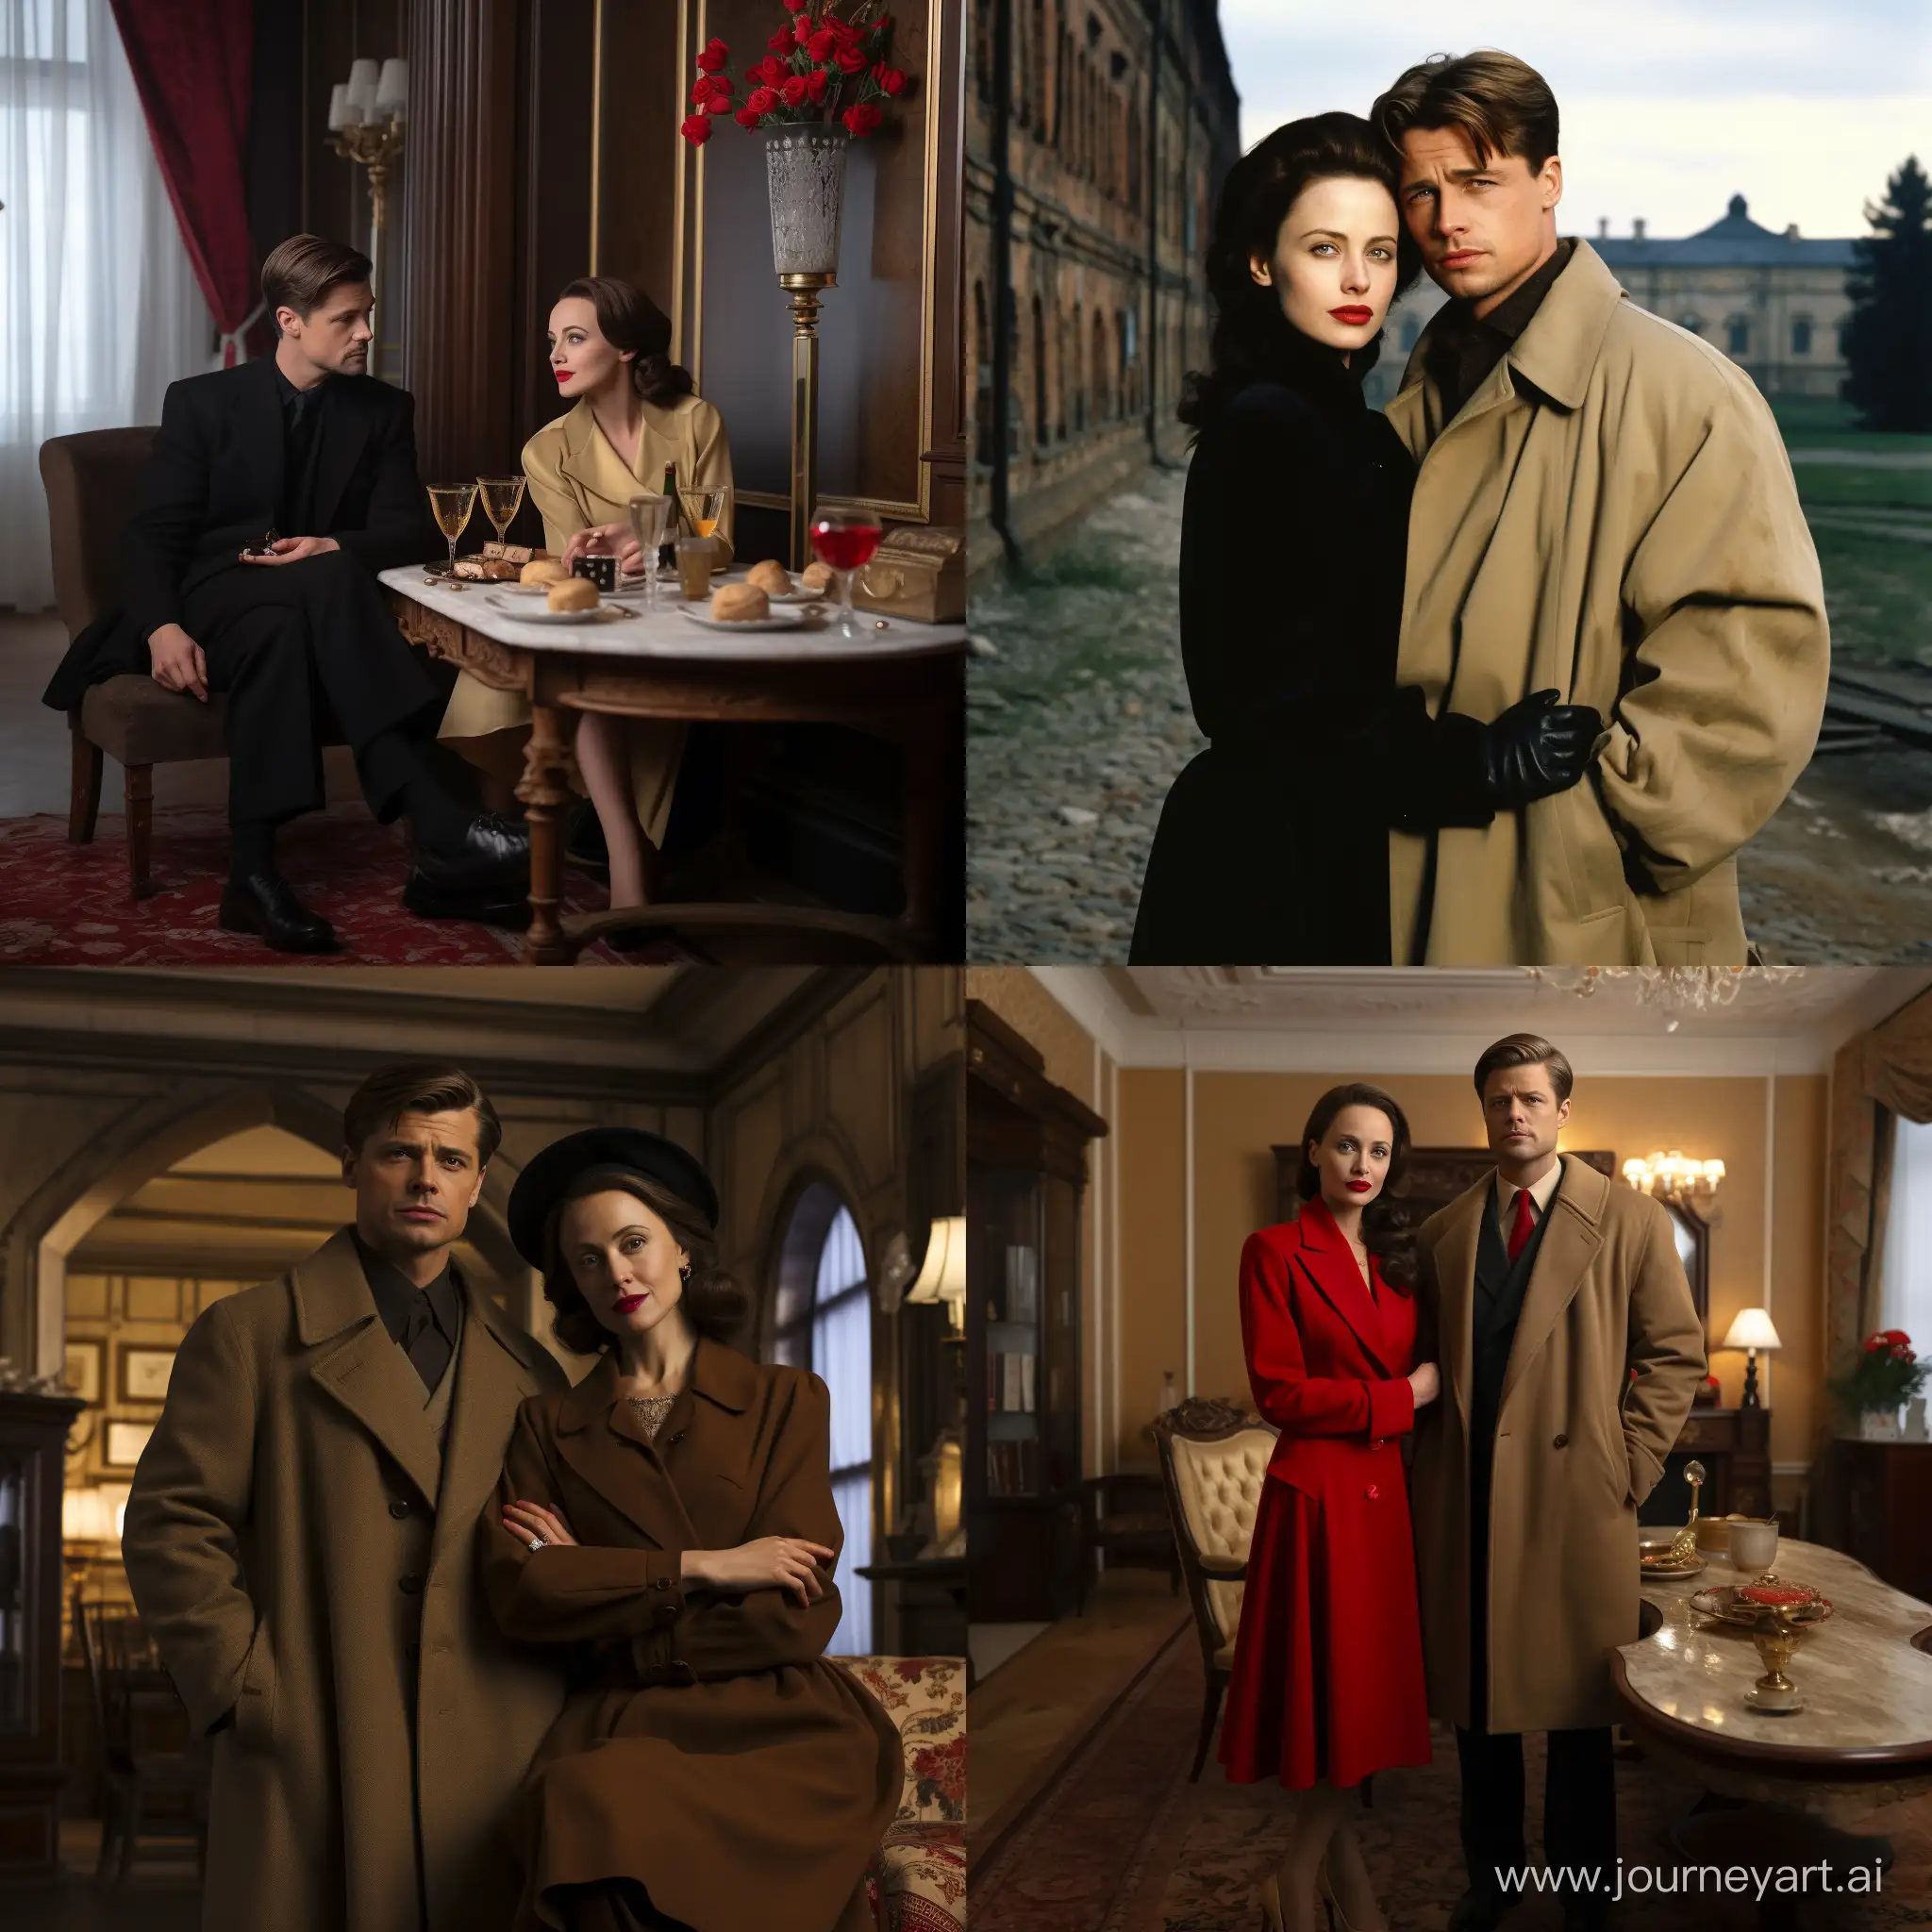 Angelina-Jolie-and-Brad-Pitt-Embrace-Love-in-Soviet-Moscow-Film